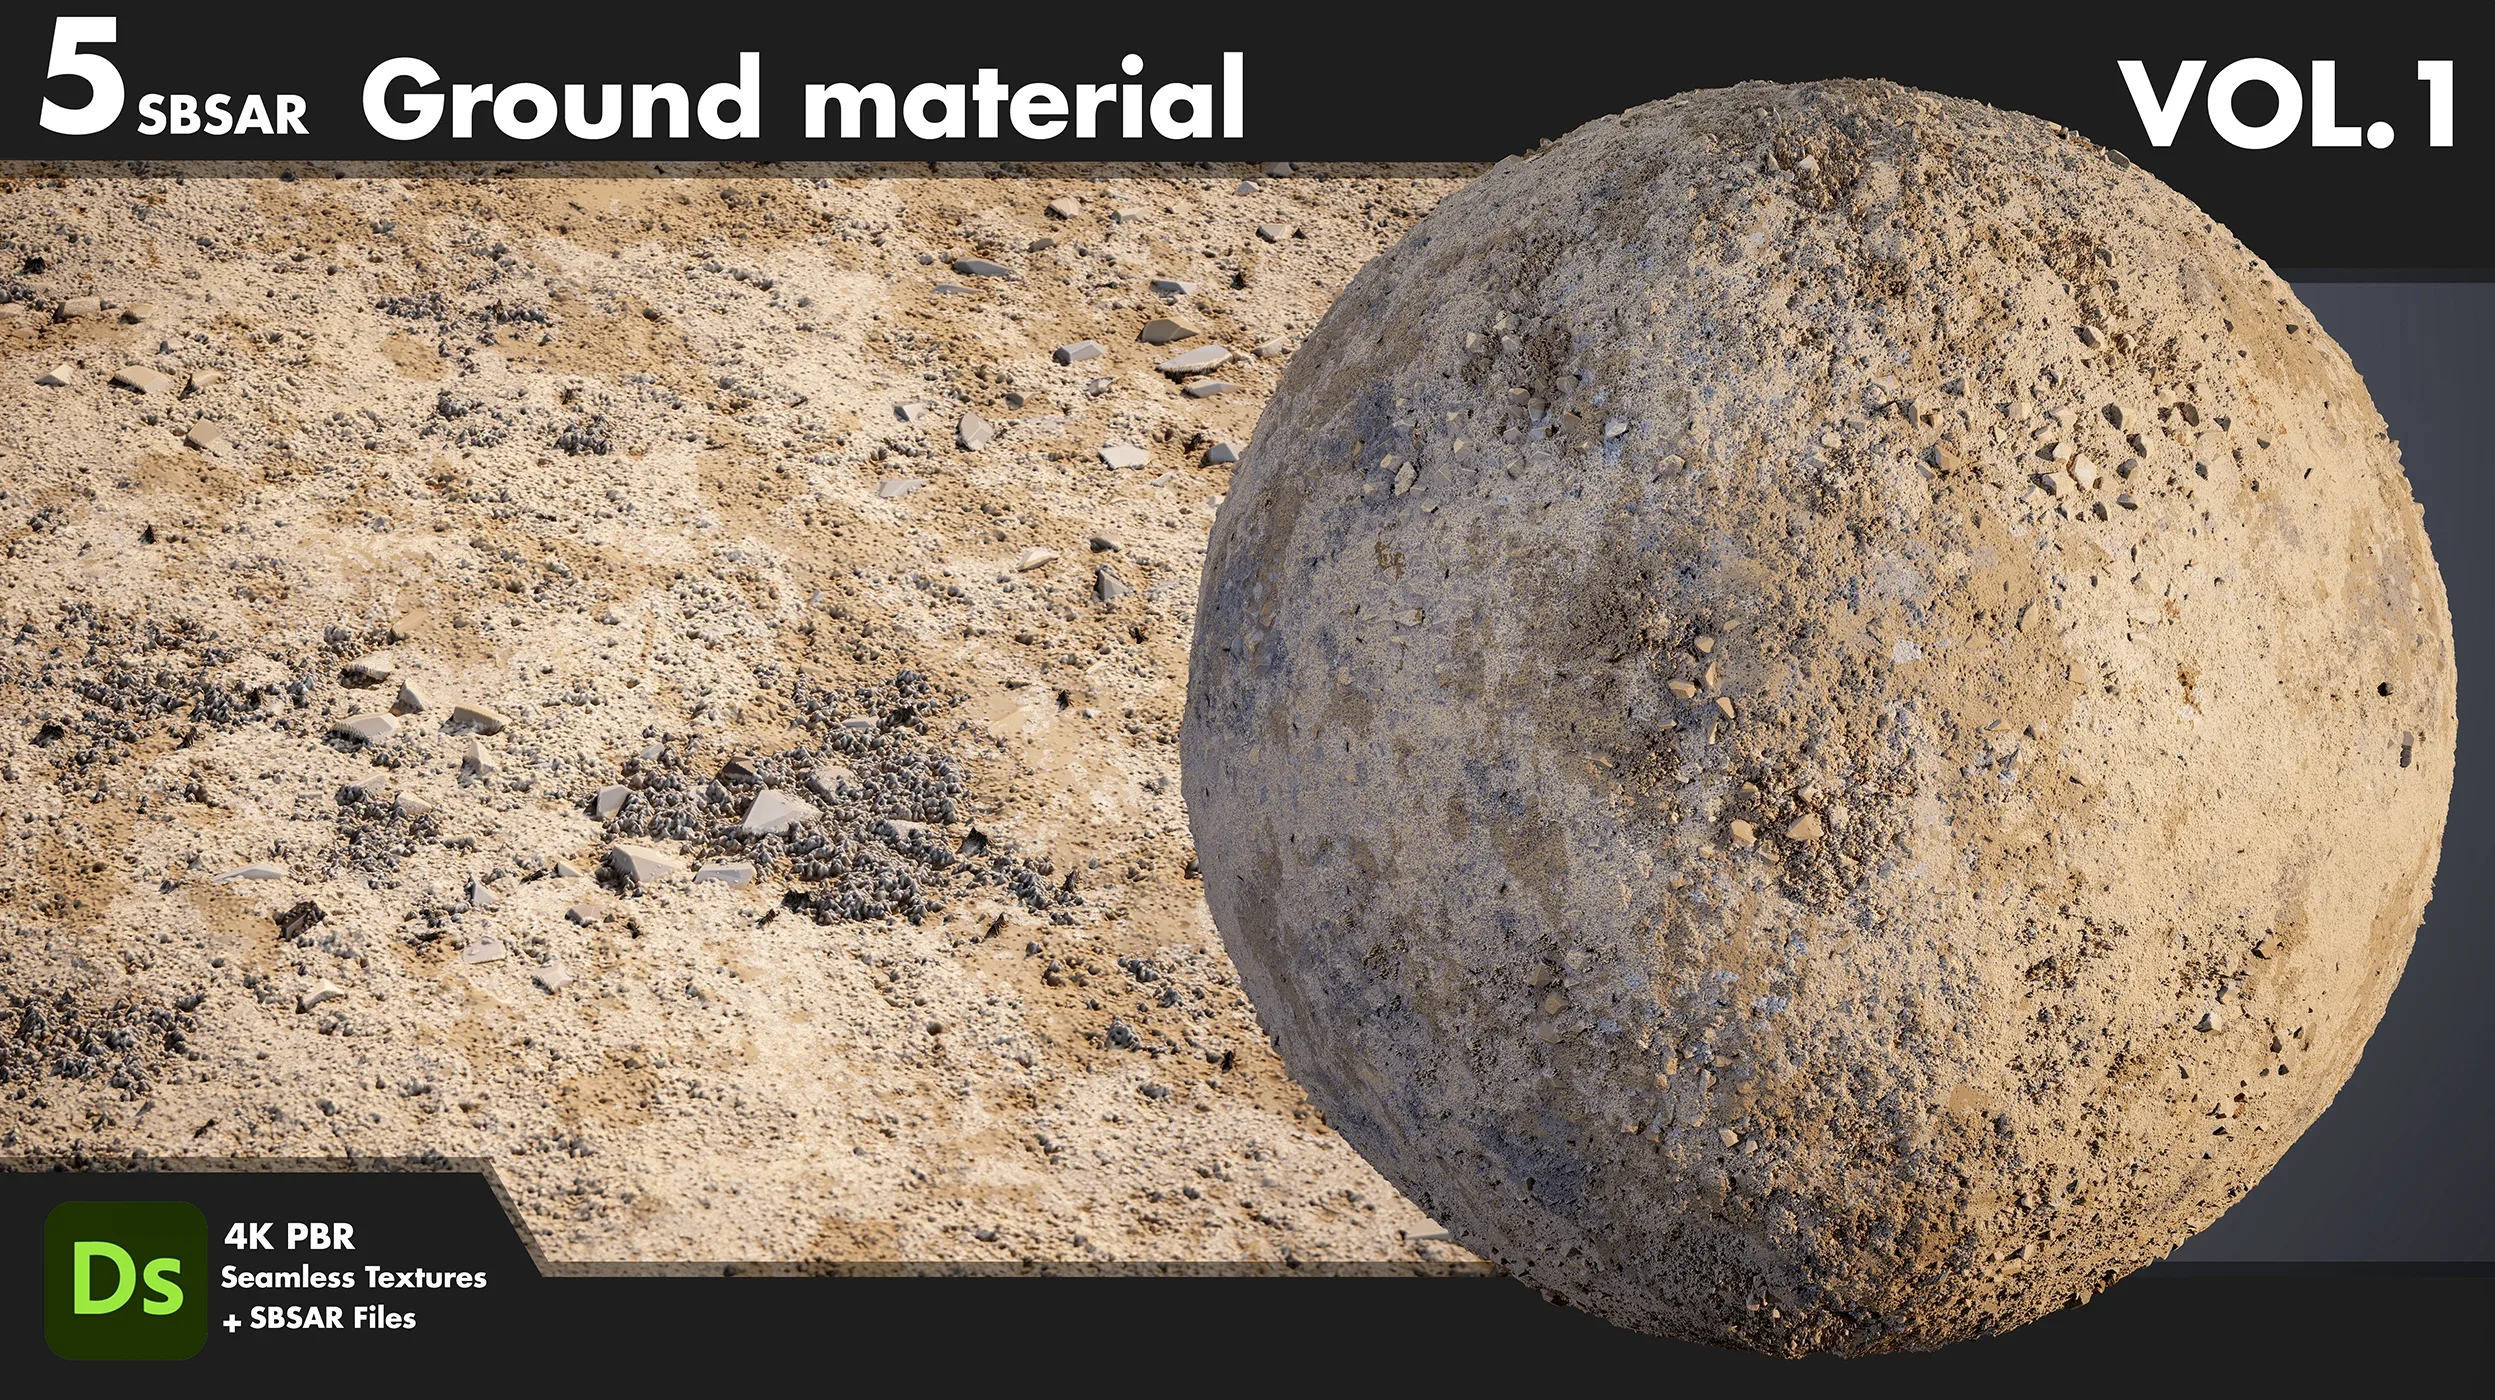 5 sbsar Ground material VOL.1